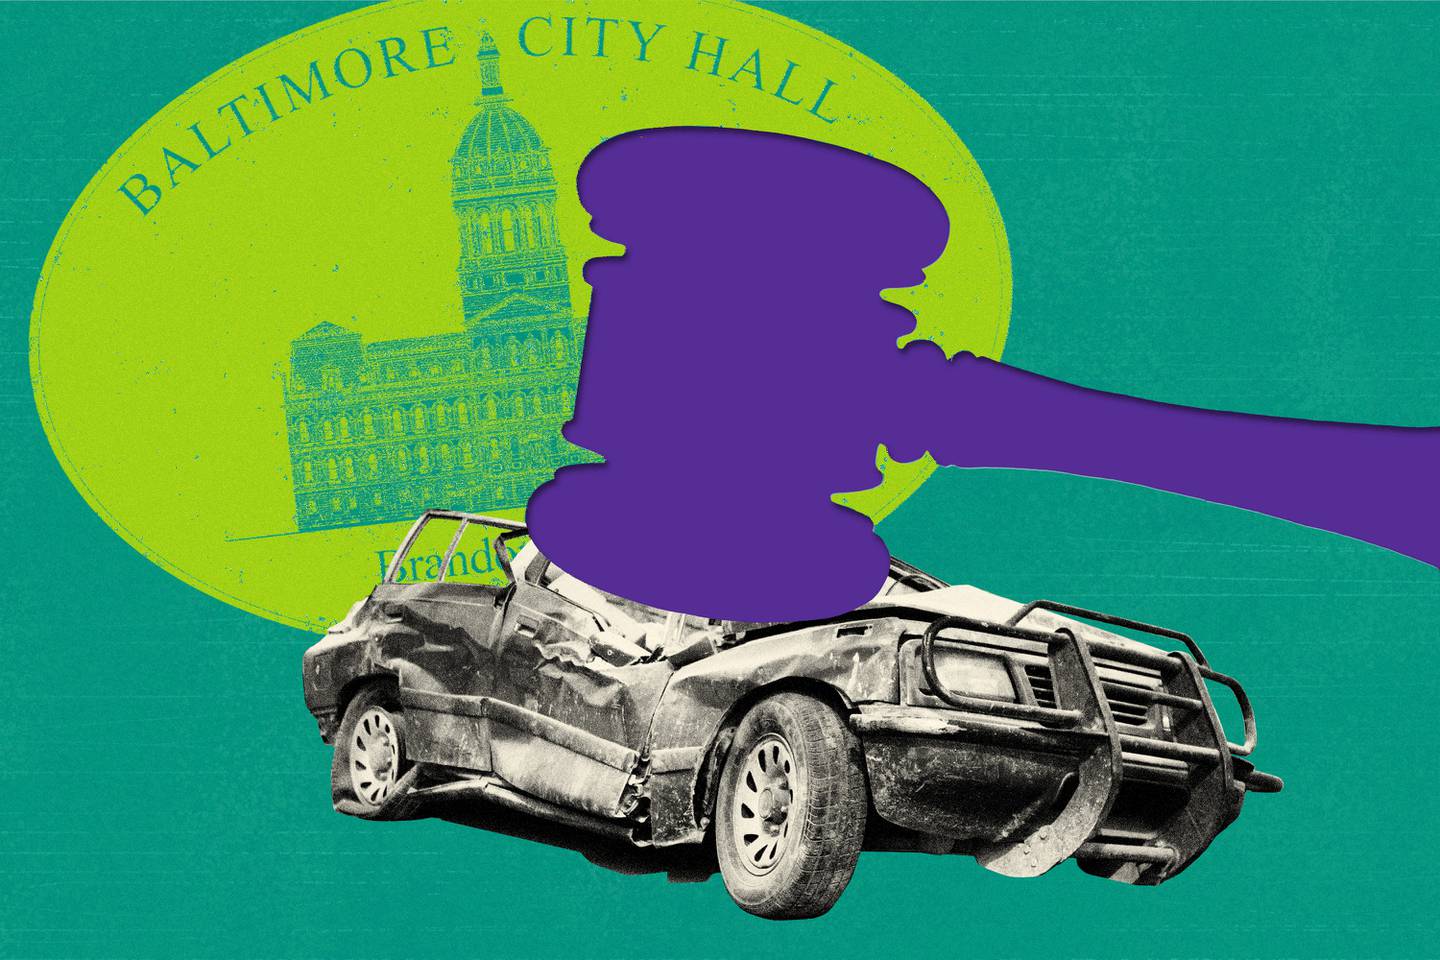 Photo illustration of cut out gavel descending on crushed car against a teal background. Behind the gavel and the car is the seal of Baltimore City Hall.